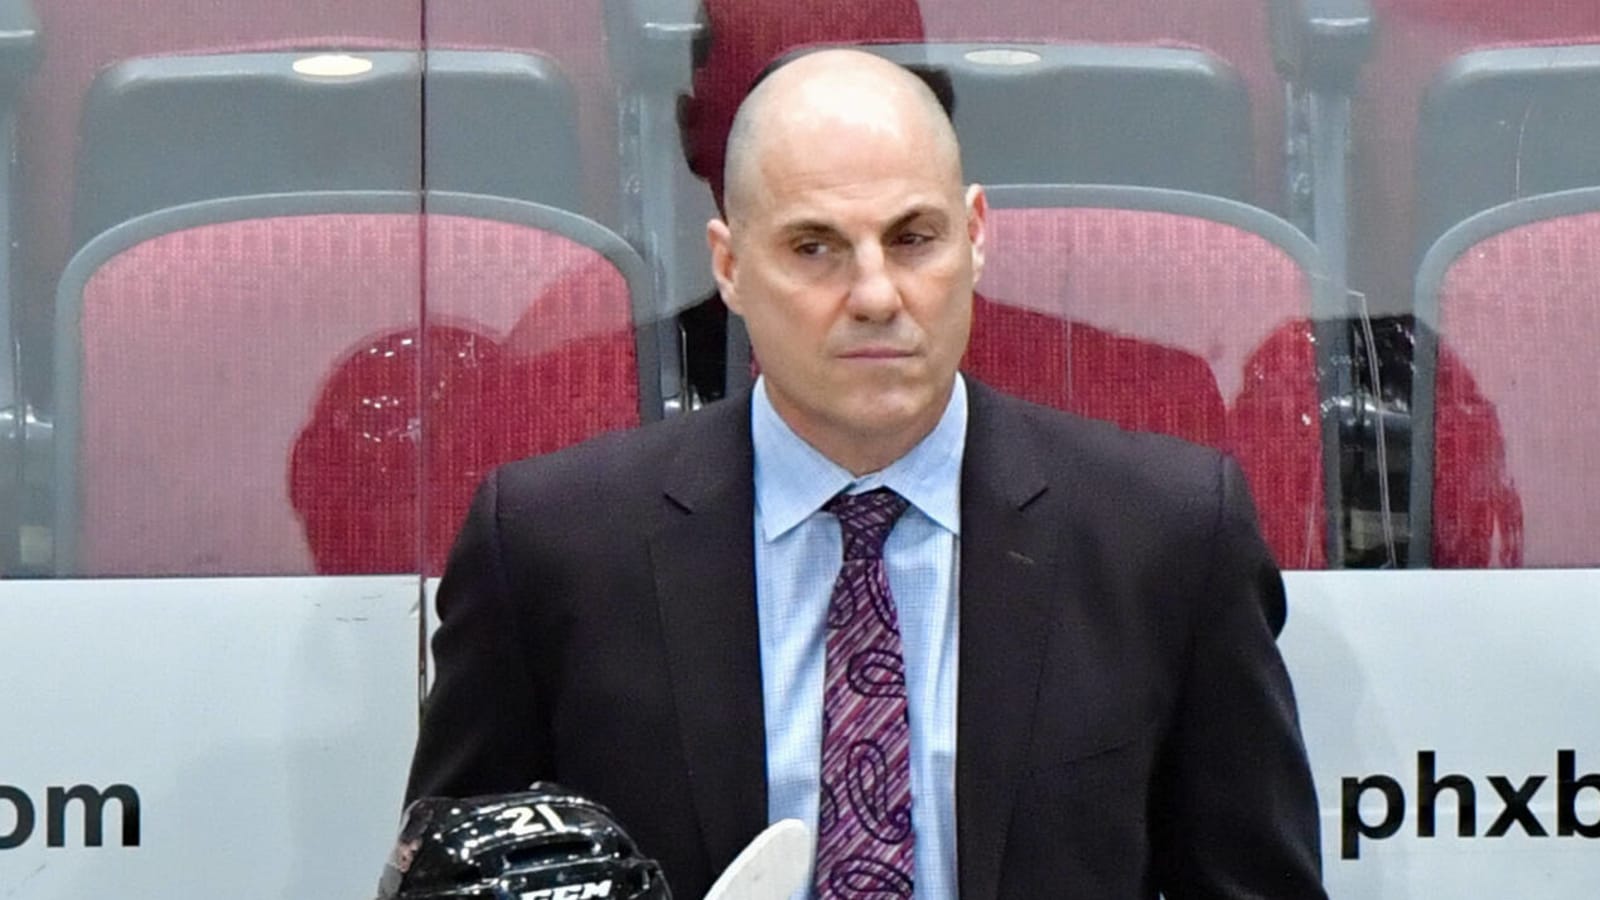 Canucks showed up for Rick Tocchet’s coaching debut in Vancouver